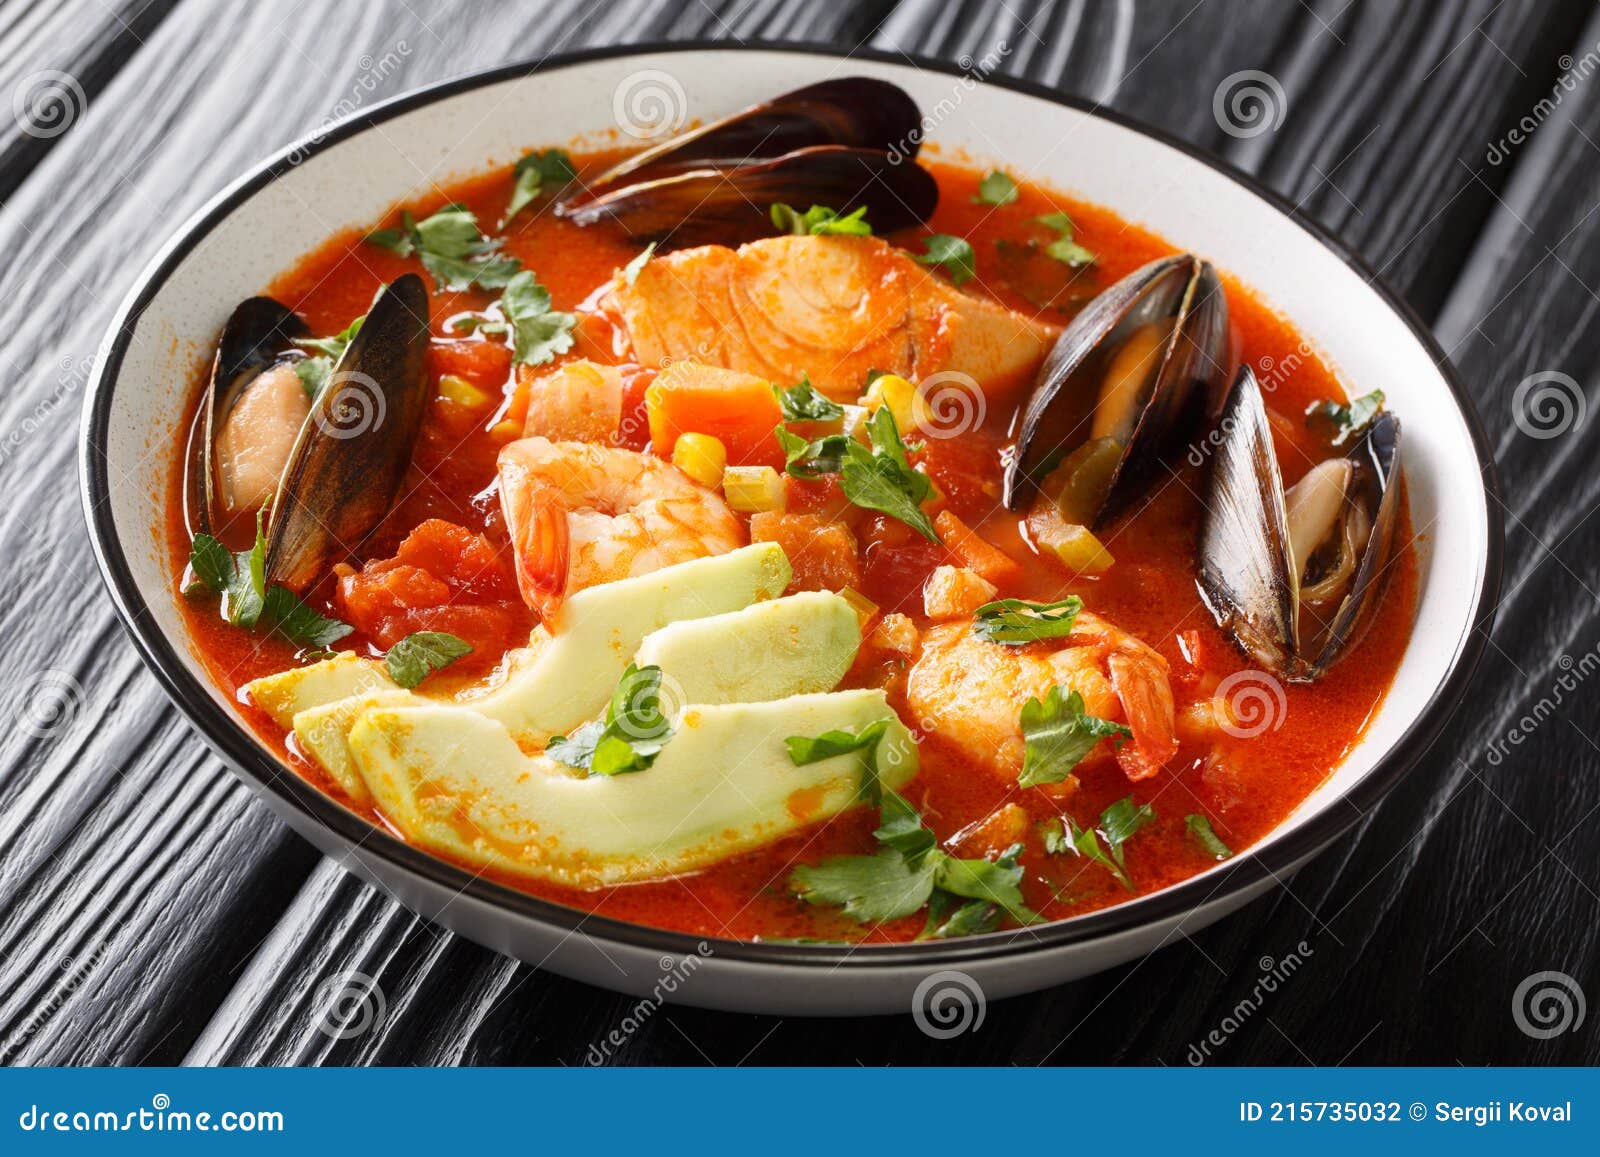 sopa de mariscos seafood soup with cod, shrimp, mussels, vegetables and avocado close-up in a bowl. horizontal